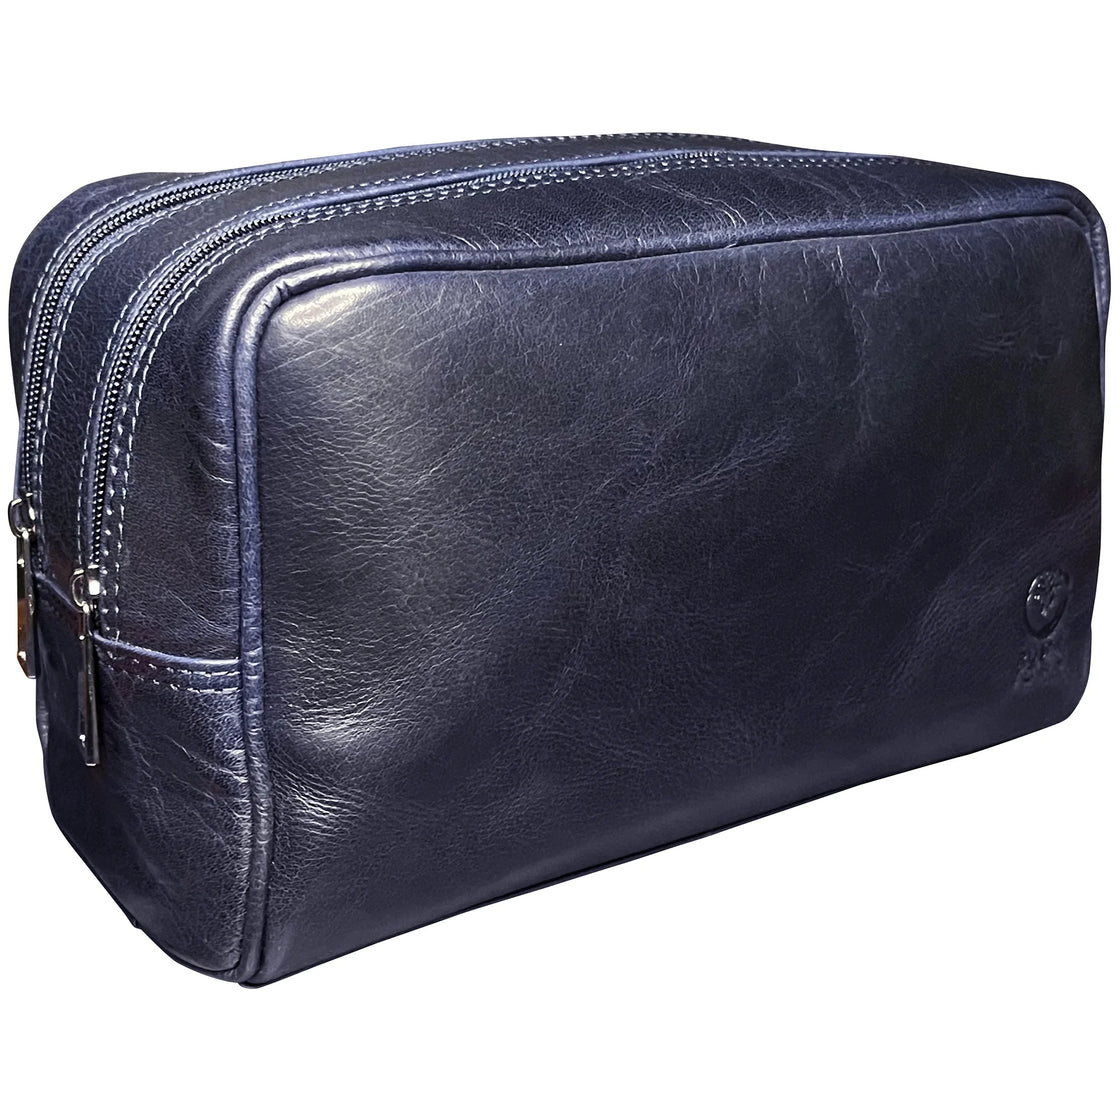 Men's Leather Small Double Zip Toiletry Bag - Water-Resistant Lined Dopp Kit, 2 Zipped Compartments - Black Onyx - Personalized Gifts, Leatherology